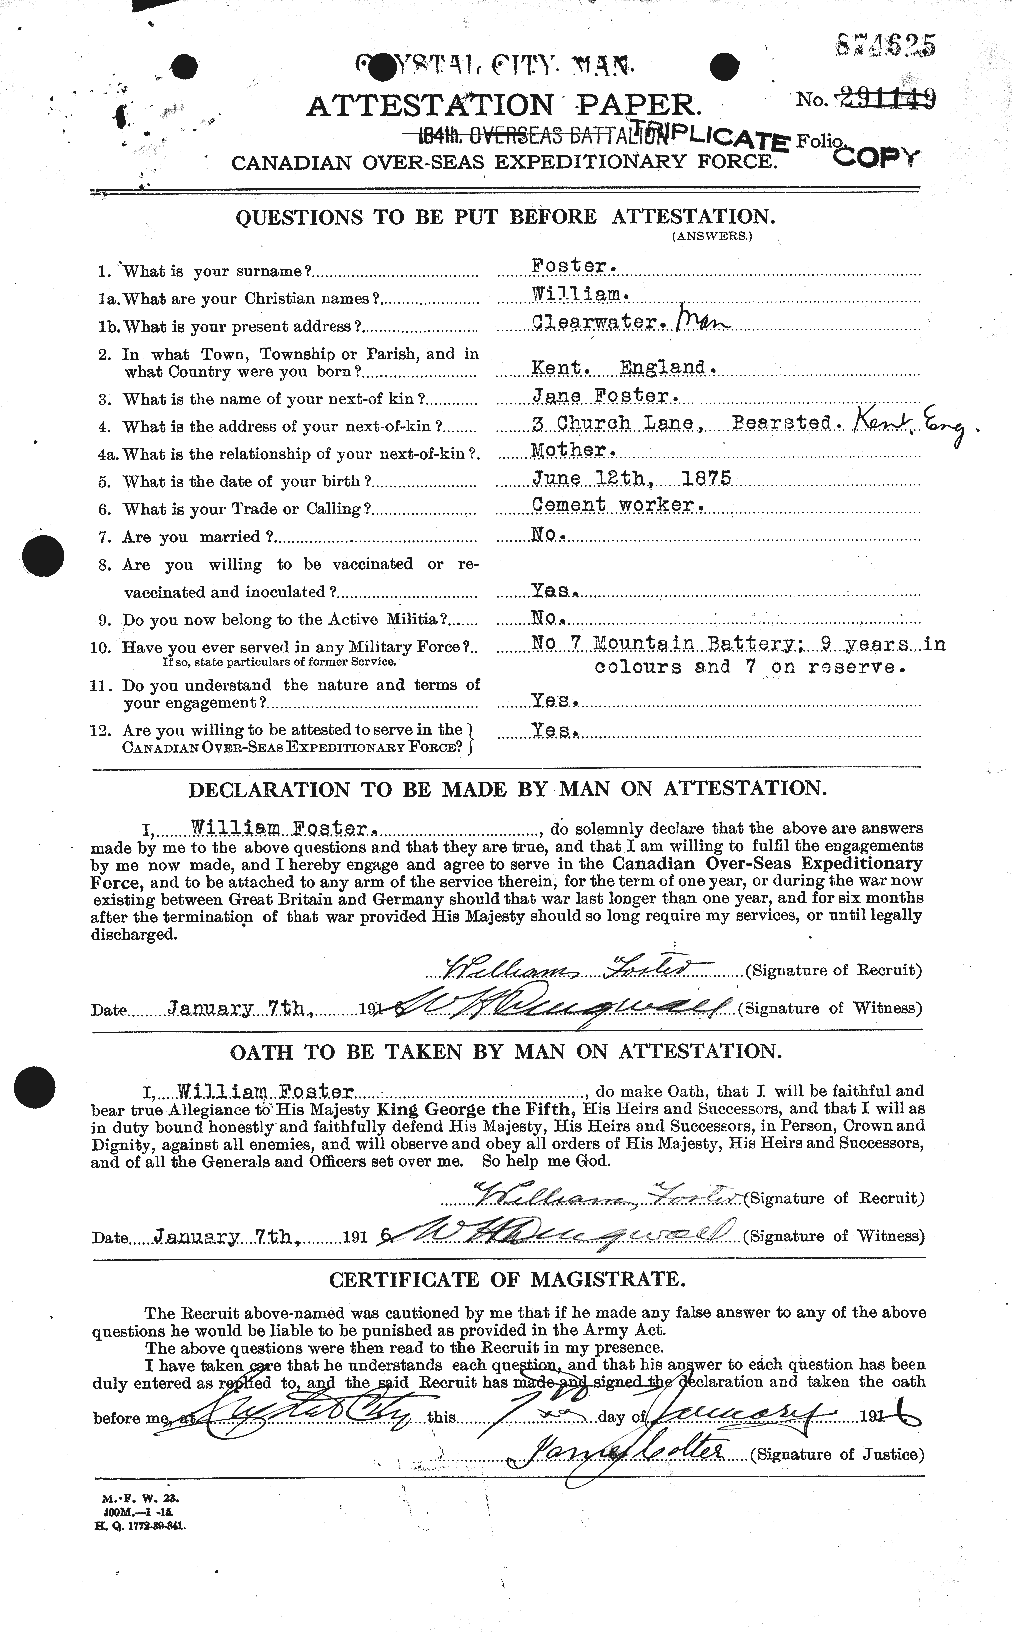 Personnel Records of the First World War - CEF 335272a